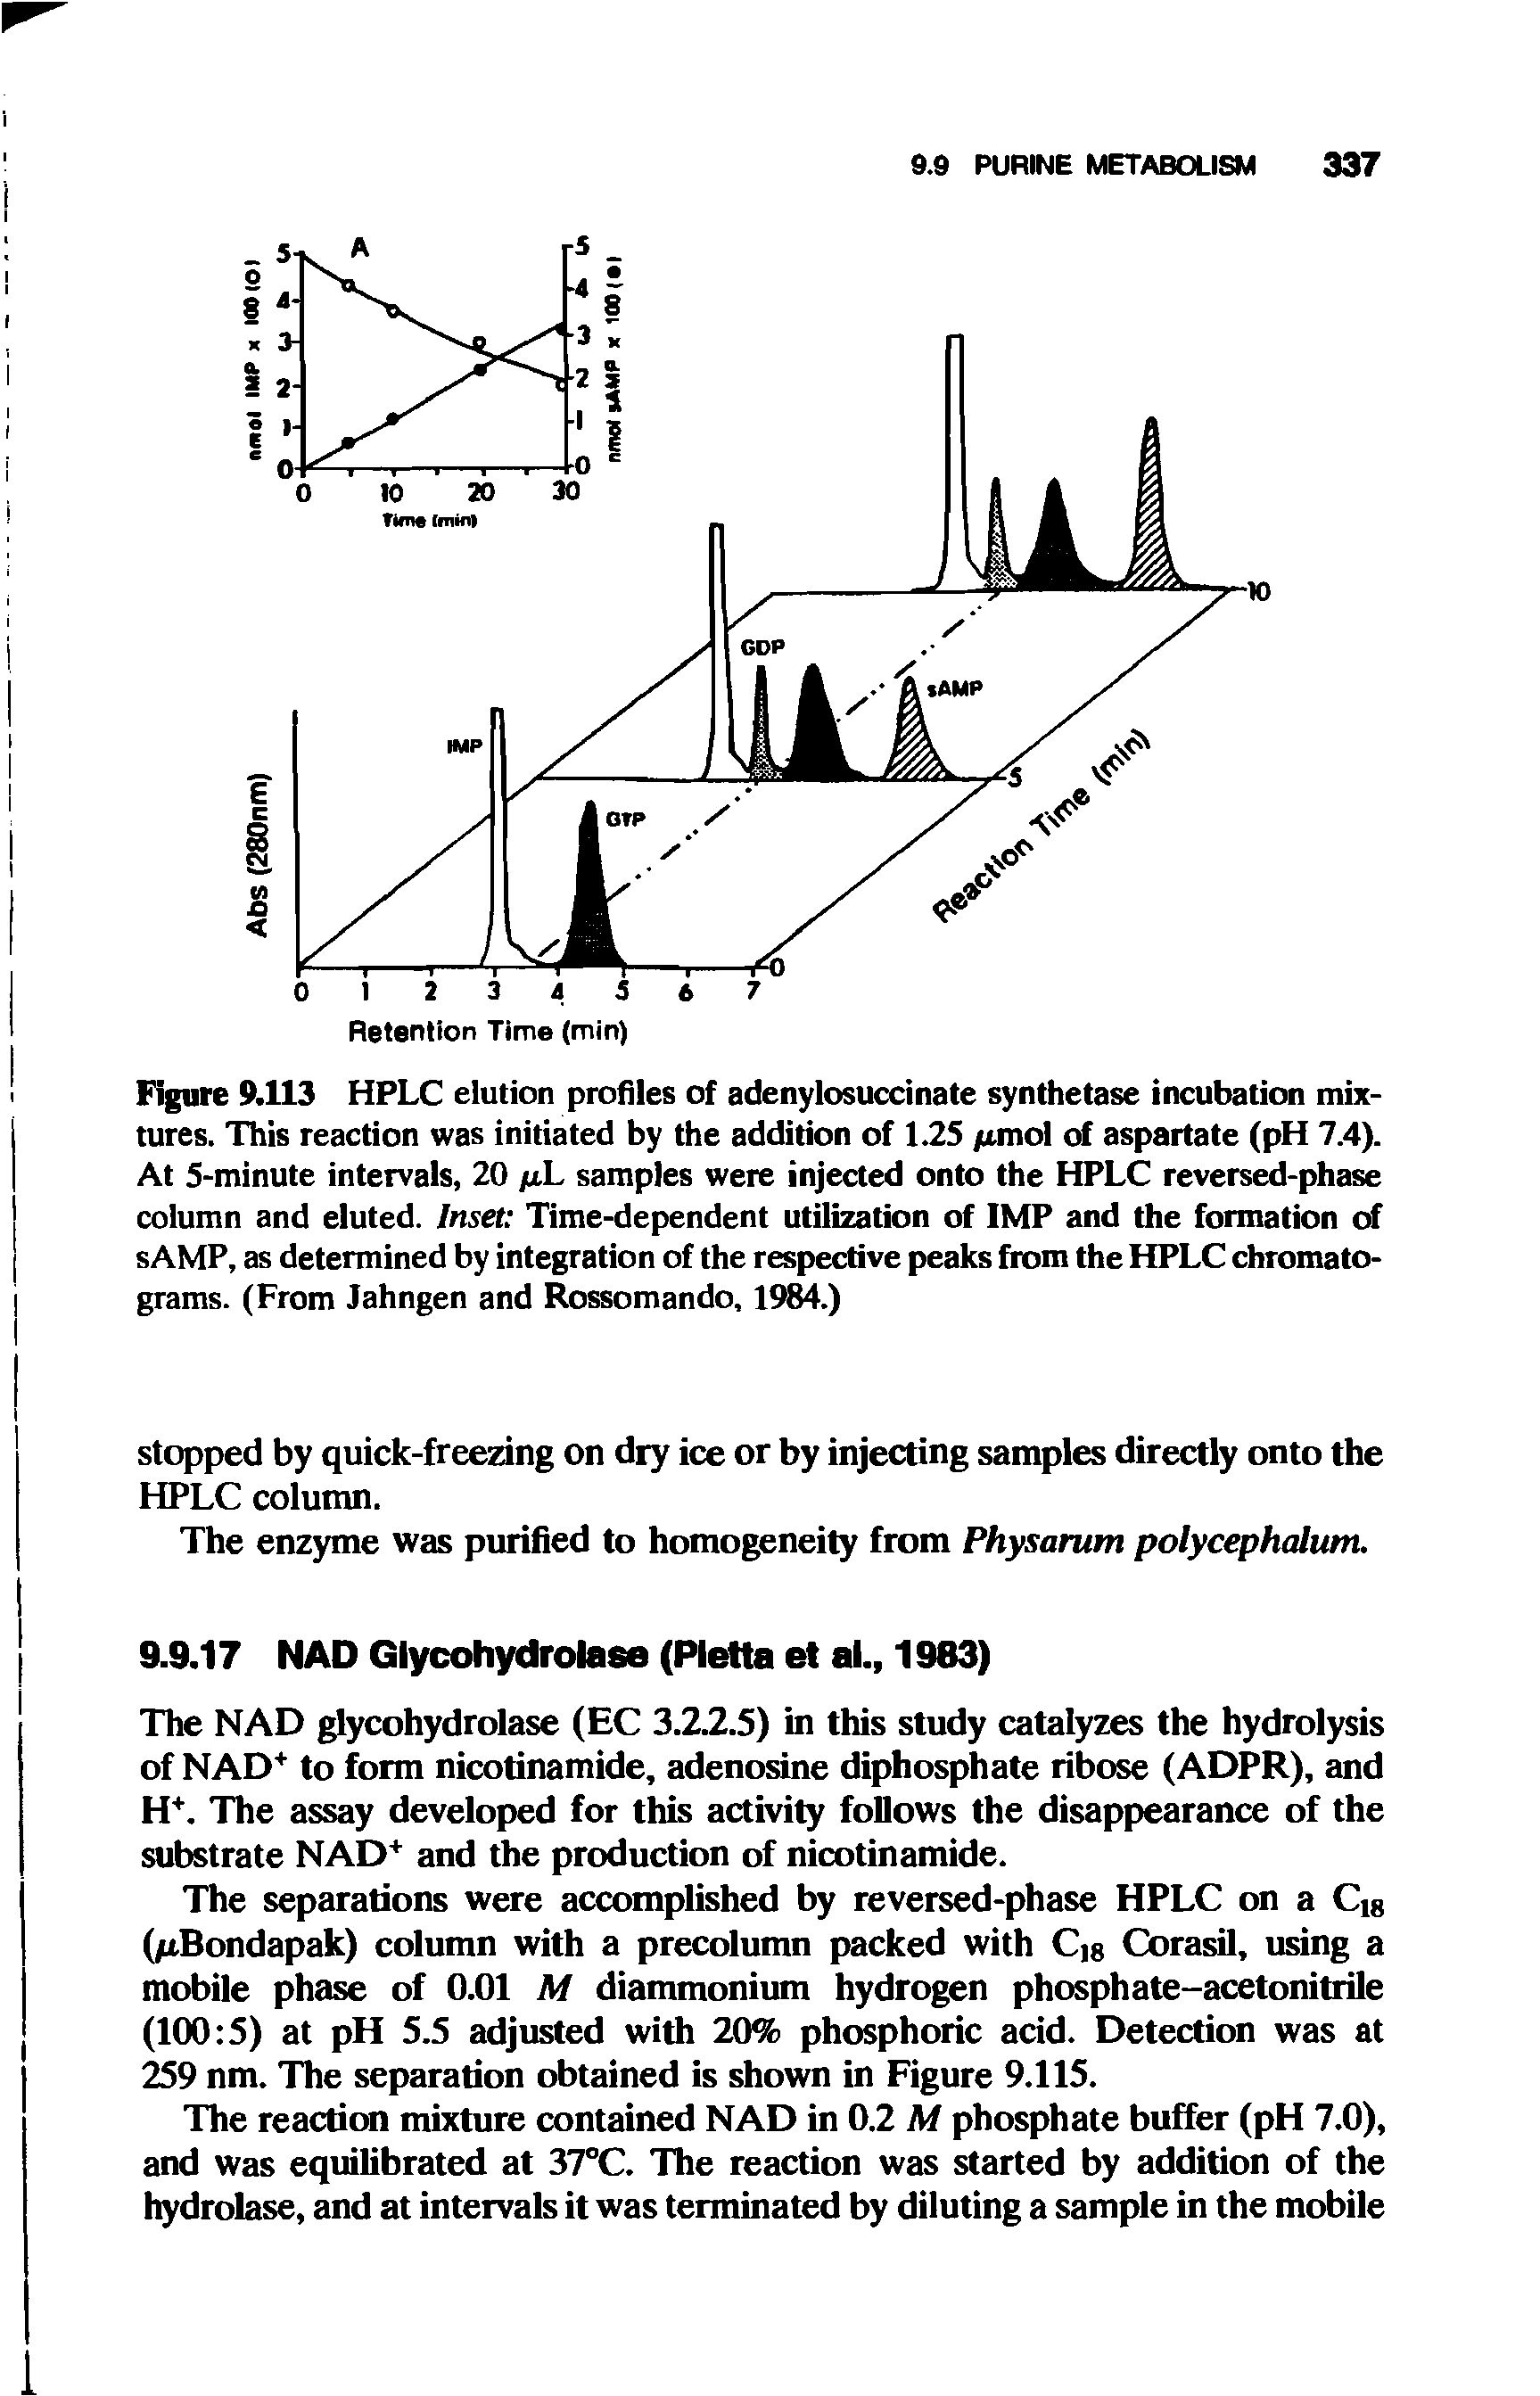 Figure 9.113 HPLC elution profiles of adenylosuccinate synthetase incubation mixtures. This reaction was initiated by the addition of 1.25 /xmol of aspartate (pH 7.4). At 5-minute intervals, 20 /xL samples were injected onto the HPLC reversed-phase column and eluted. Inset Time-dependent utilization of IMP and the formation of sAMP, as determined by integration of the respective peaks from the HPLC chromatograms. (From Jahngen and Rossomando, 1984.)...